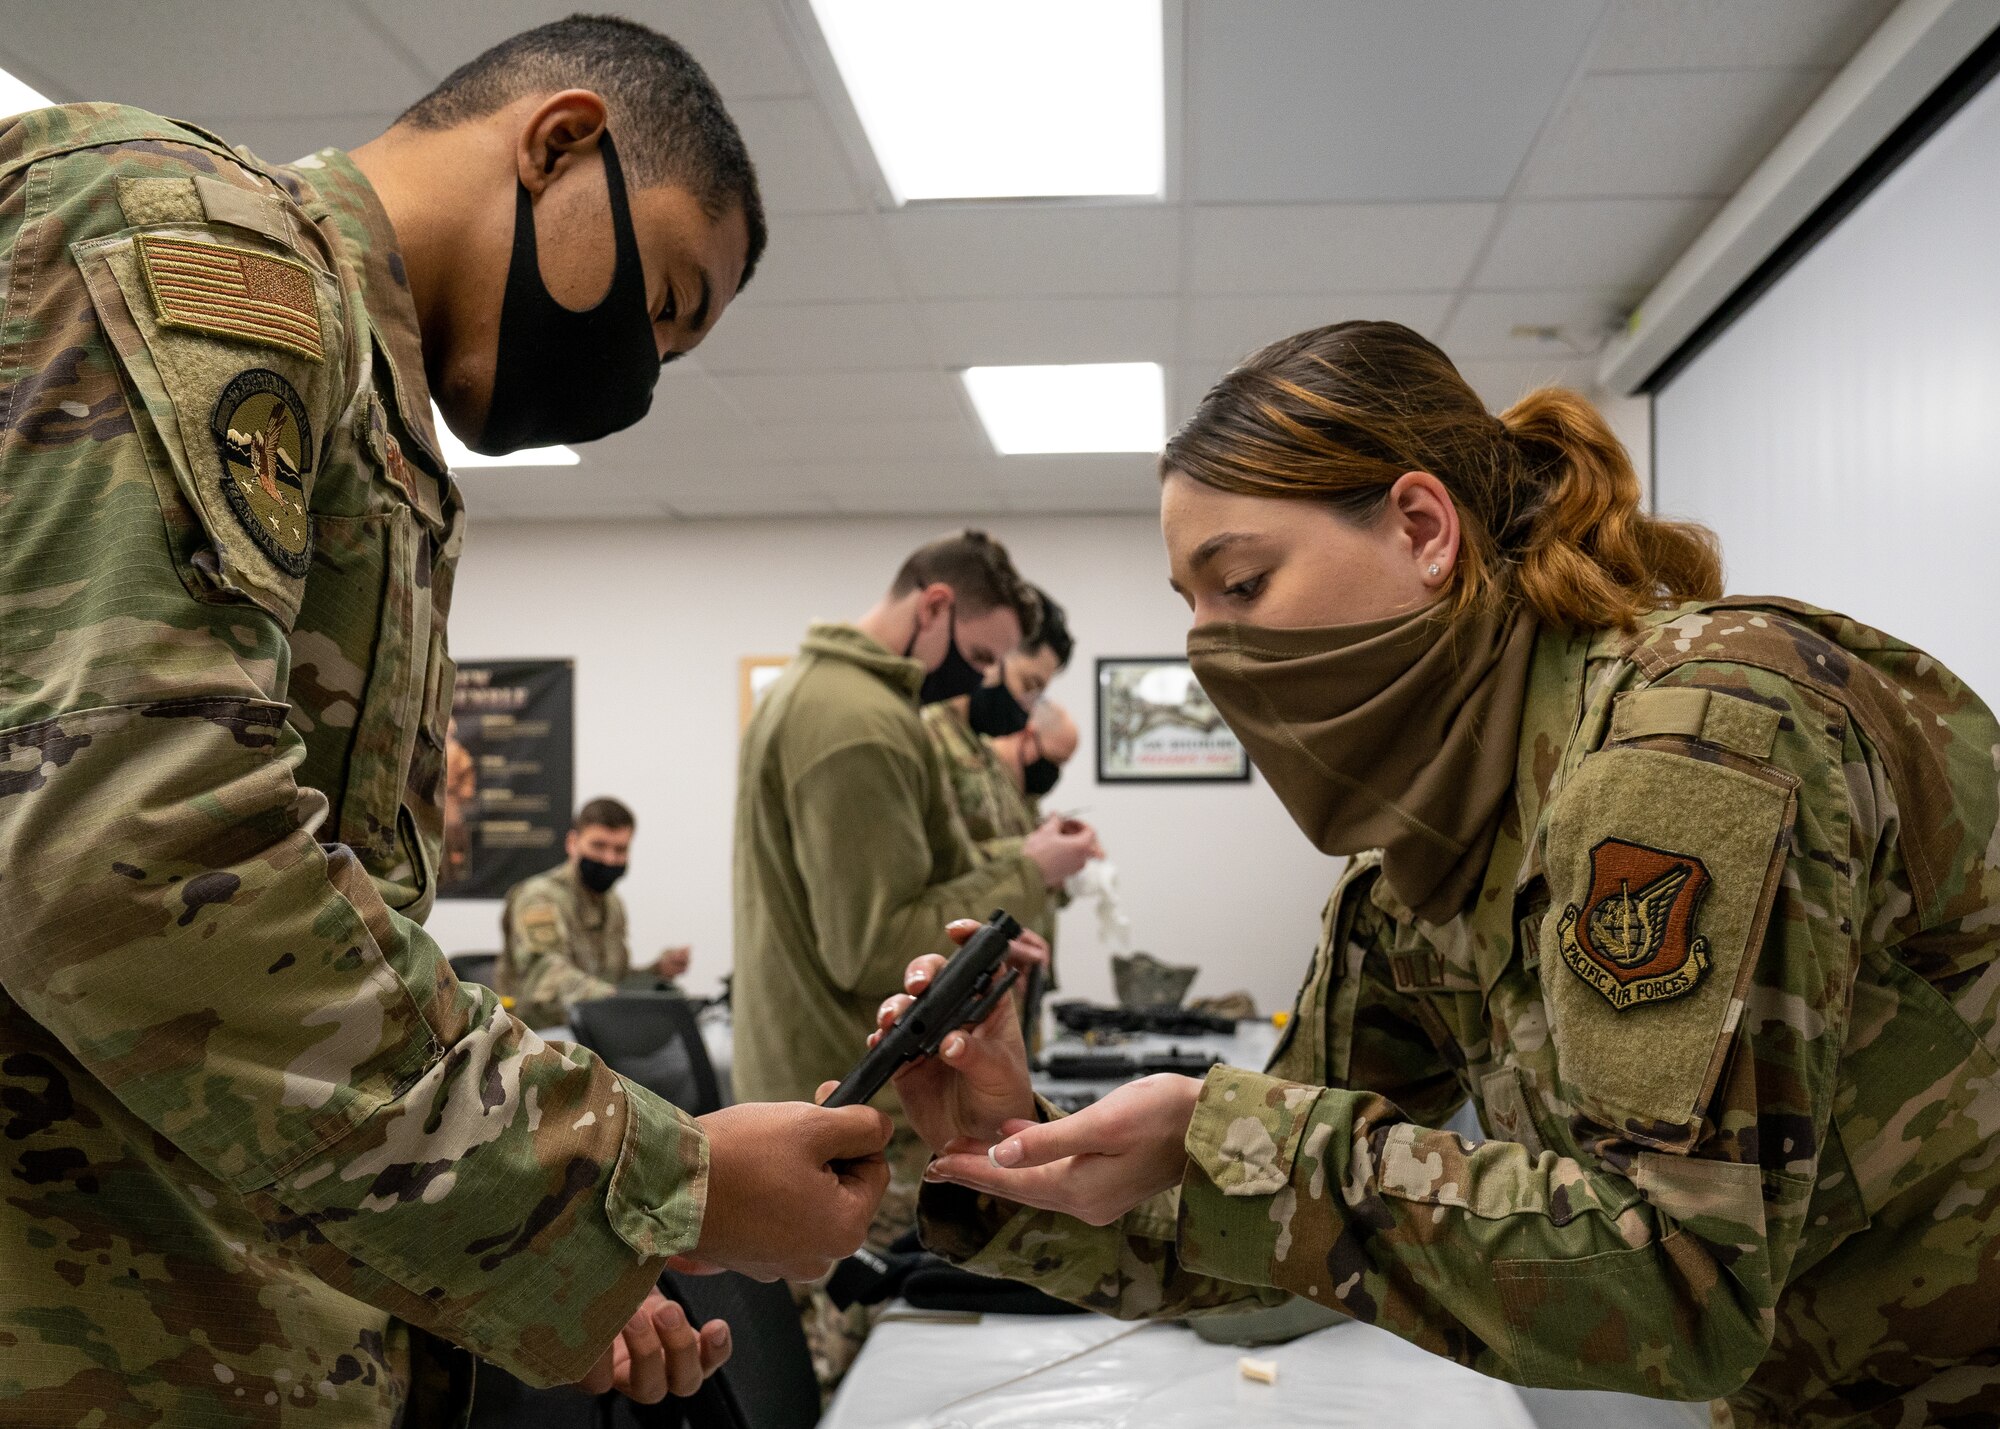 Airmen assigned to the 773d Civil Engineer Squadron practice assembly and cleaning of M4 carbines during Prime Base Engineer Emergency Force Day.